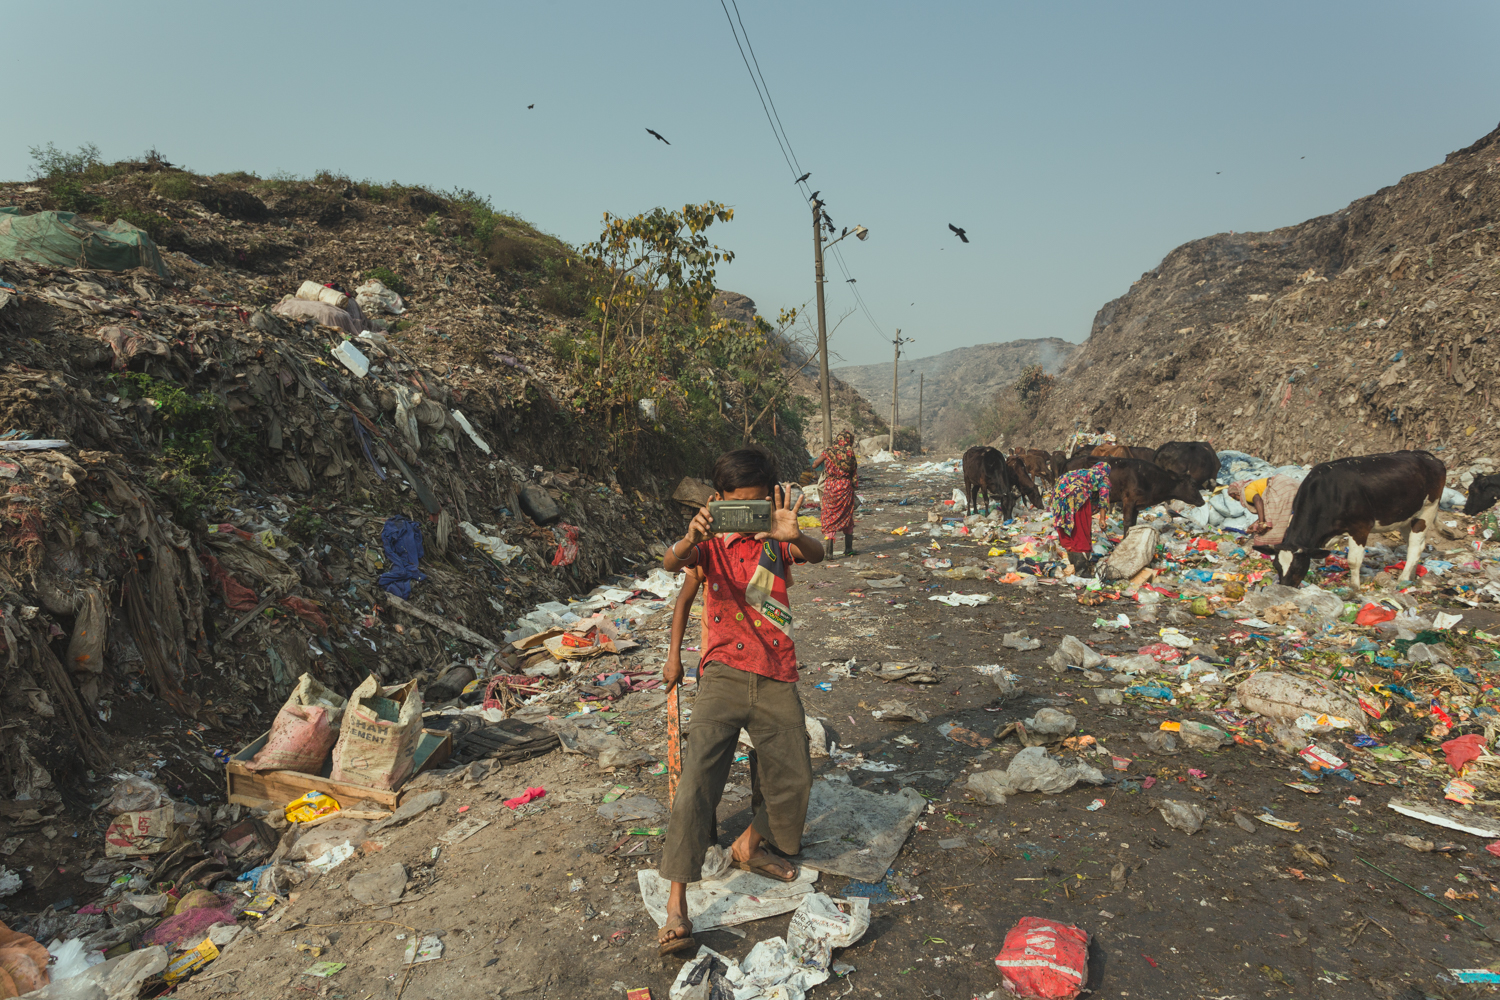 Boy of the Waste Picker community takes a photograph in Chittagong, Bangladesh.